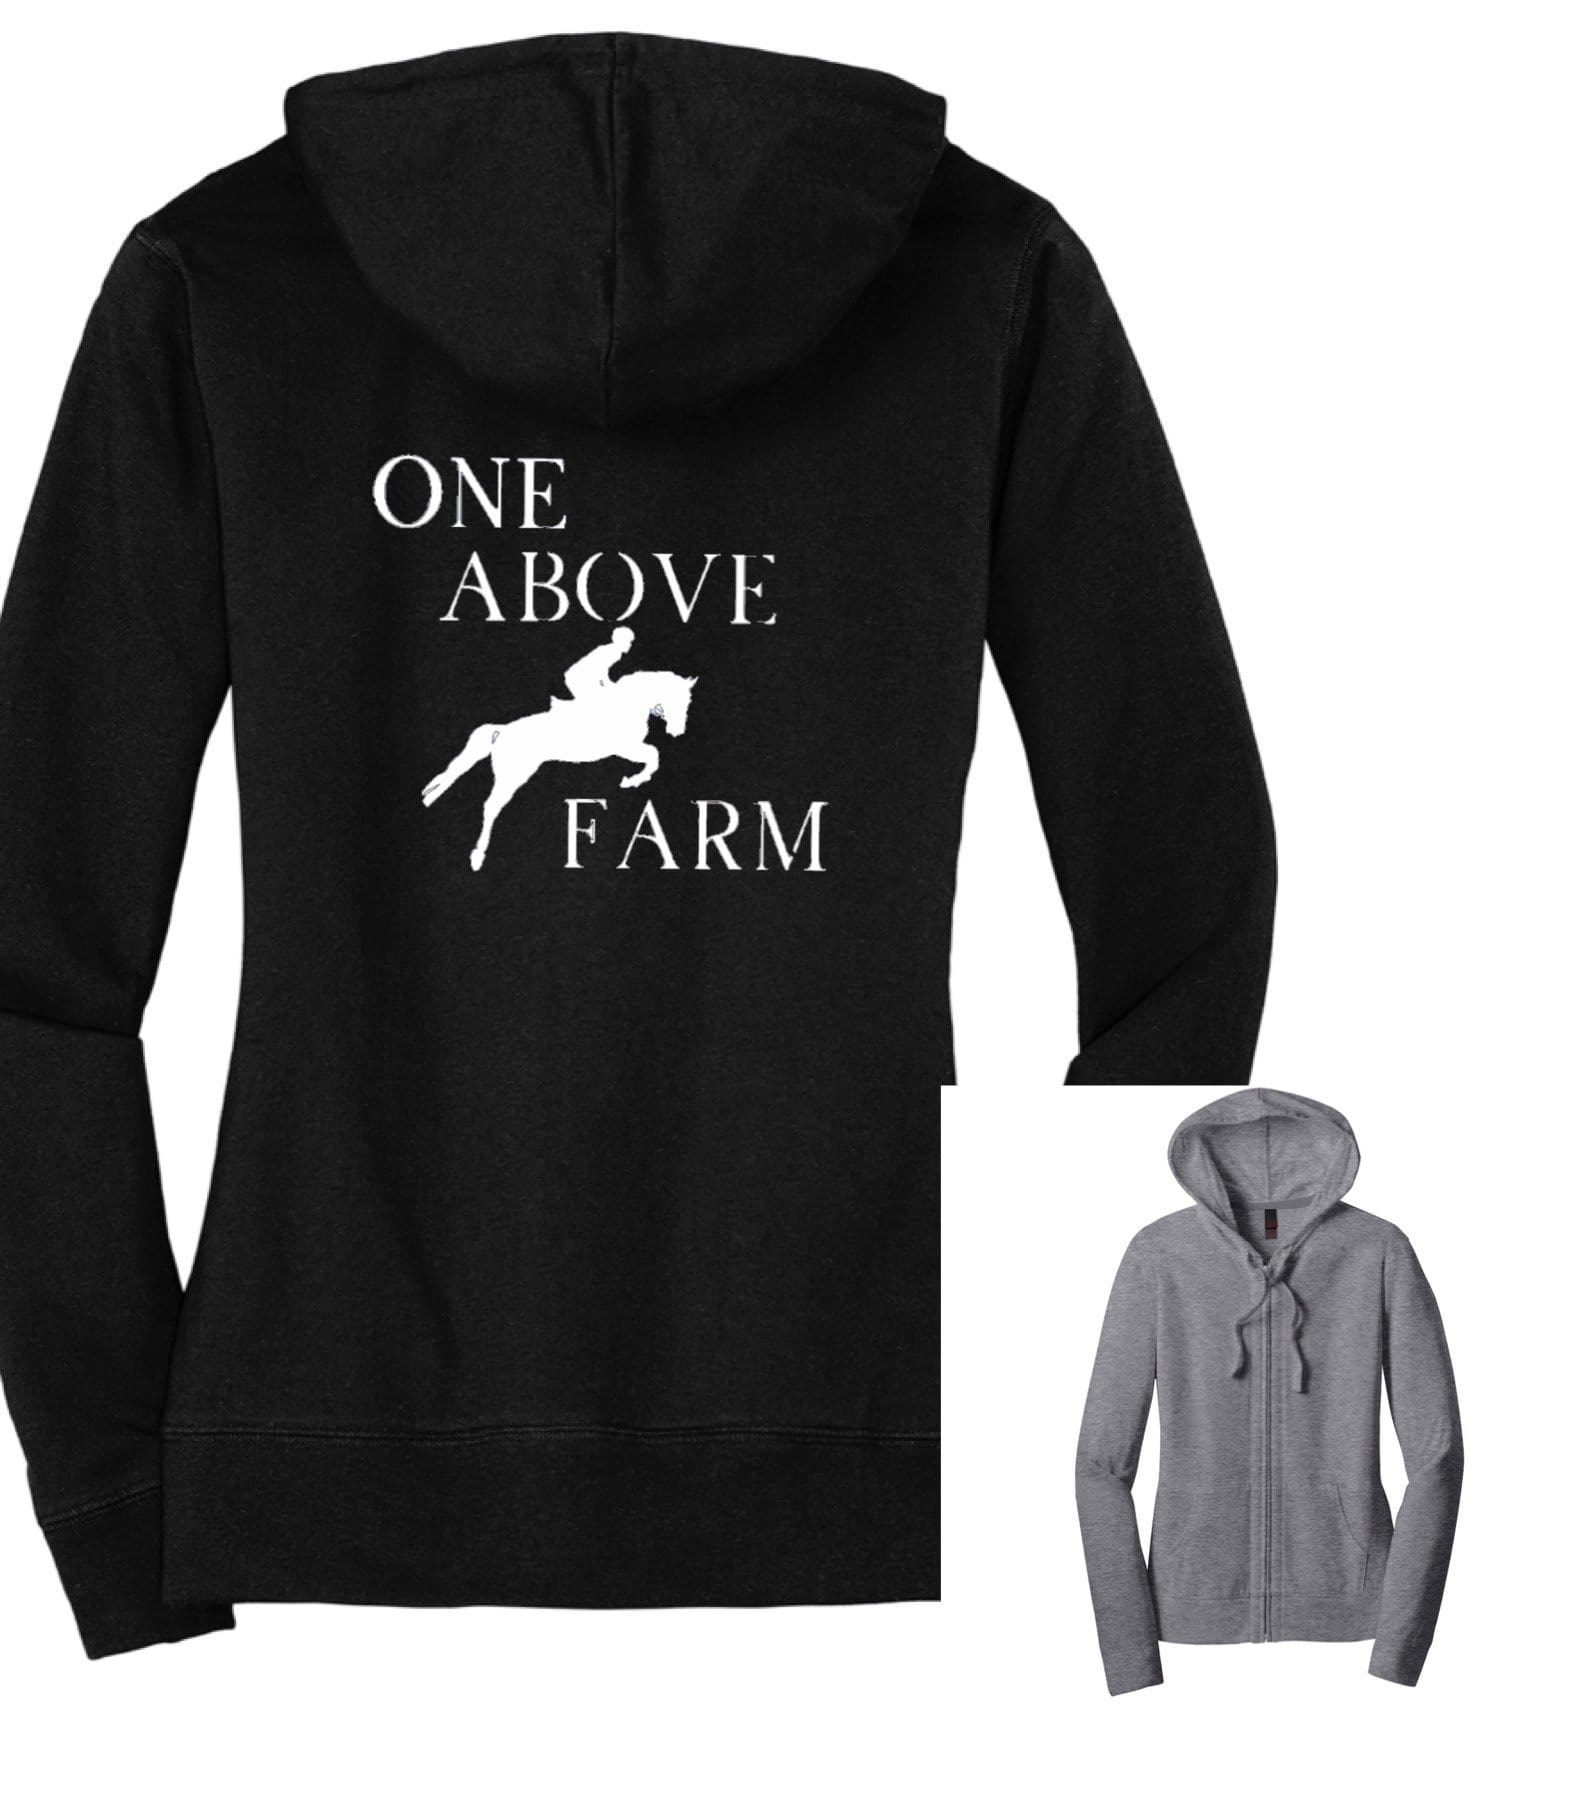 Equestrian Team Apparel Custom Team Shirts One Above Farm Zip Up Hoodie equestrian team apparel online tack store mobile tack store custom farm apparel custom show stable clothing equestrian lifestyle horse show clothing riding clothes horses equestrian tack store